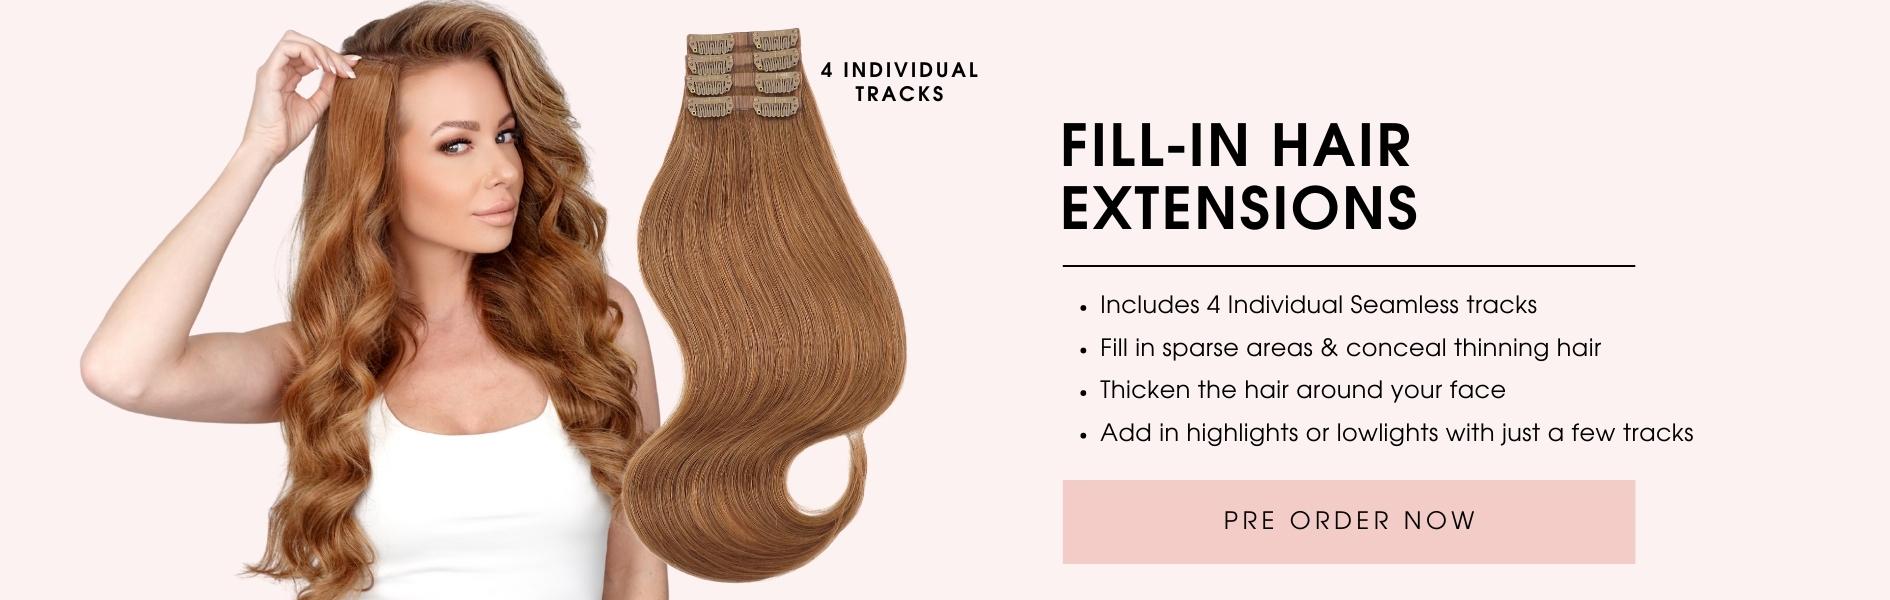 fill-in-clip-in-hair-extensions-cashmere-hair-shop-all.jpg